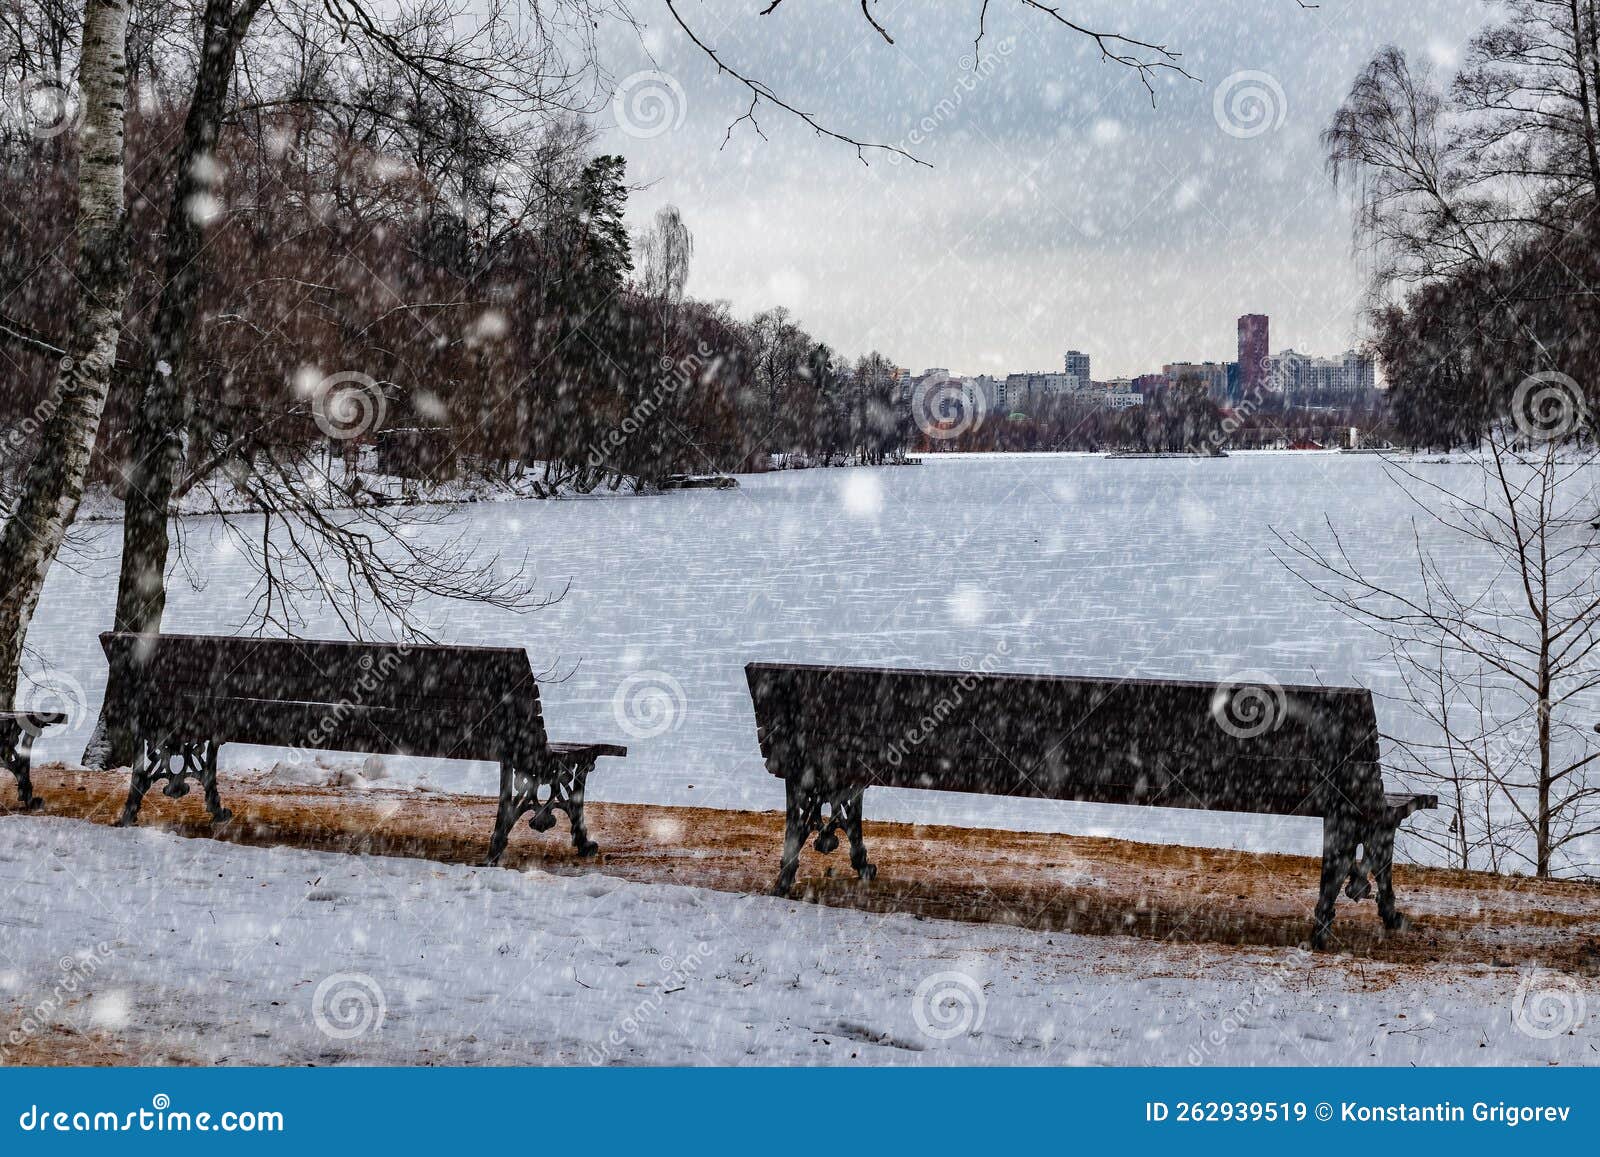 Trees And Benches By Frozen Lake In Winter During Snowfall Stock Image